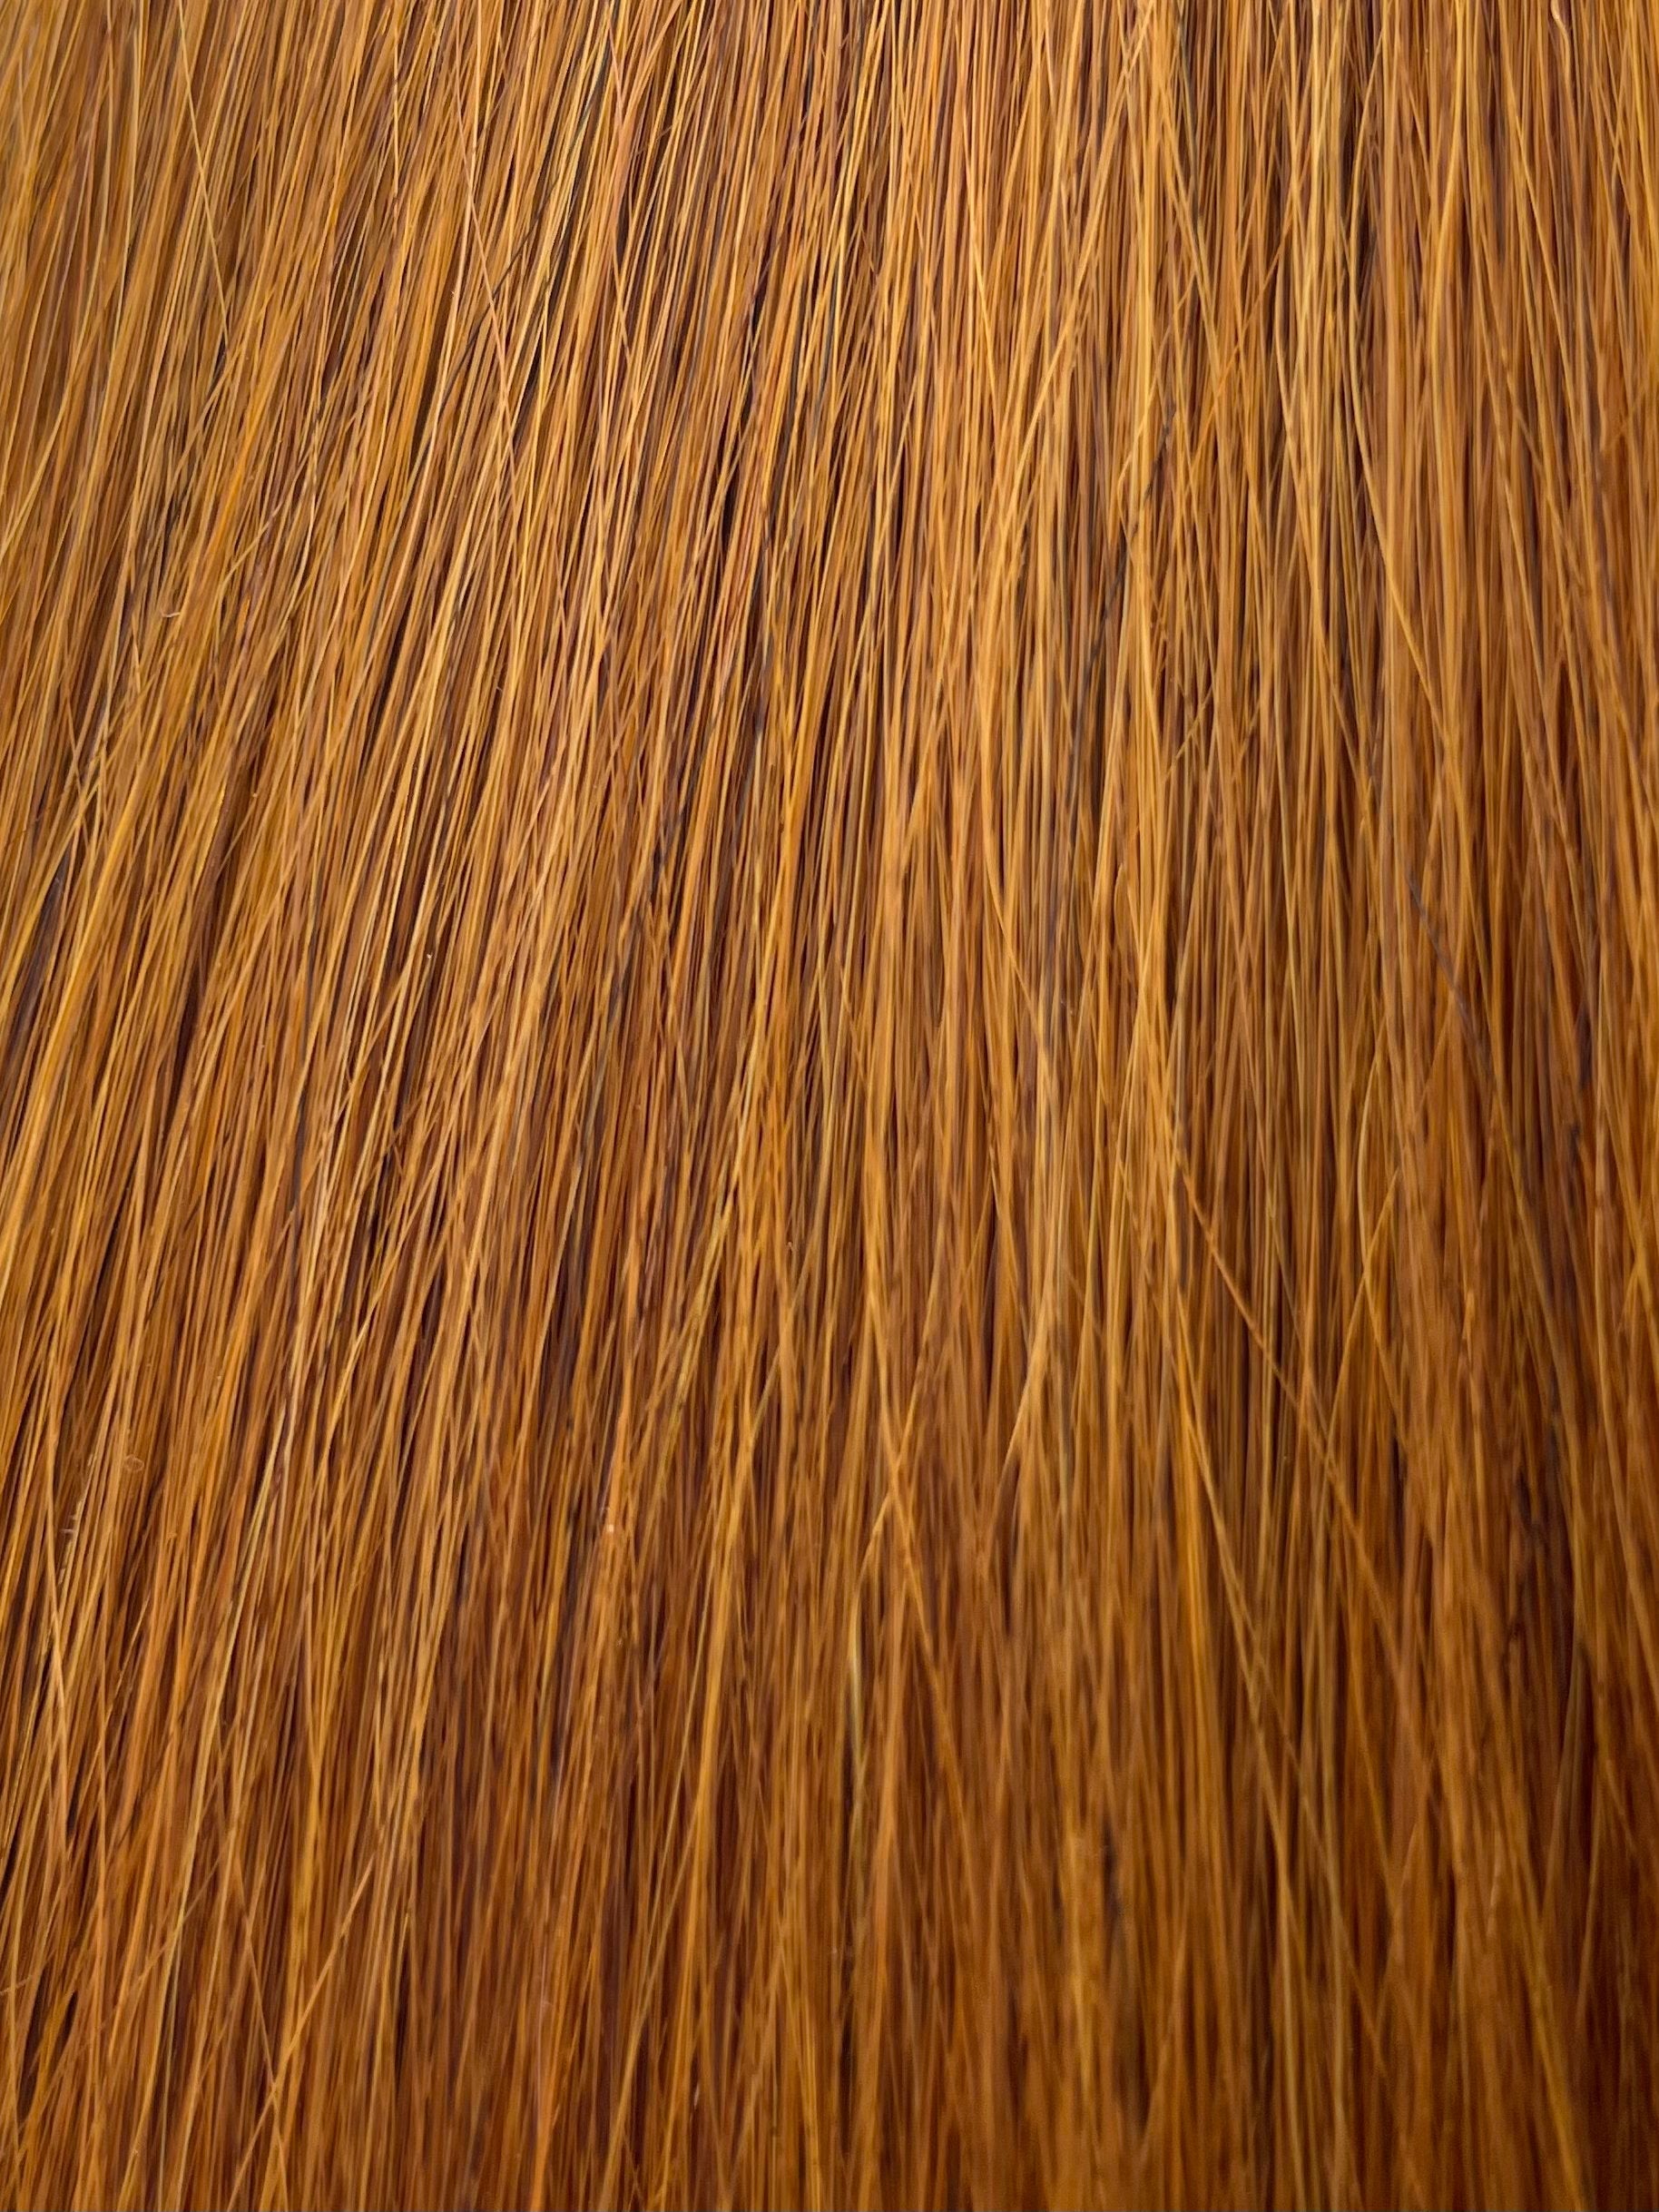 50% OFF Tape  #30 - 40cm/ 16 Inches - Deep Copper Blonde - 16 Grams